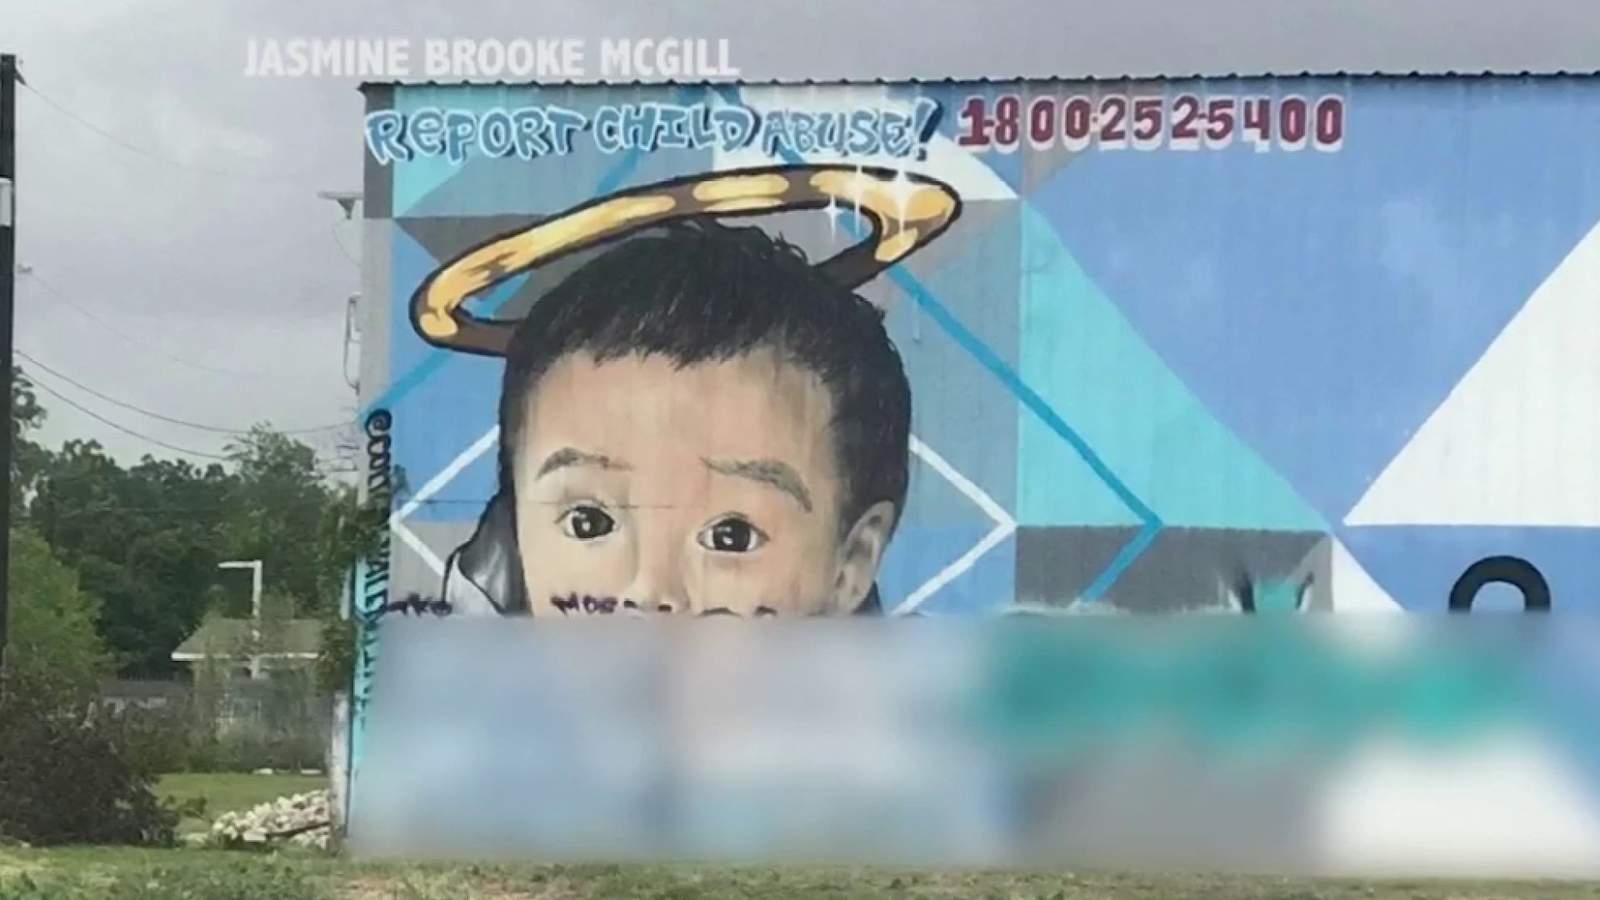 Community comes together to raise money for vandalized King Jay mural